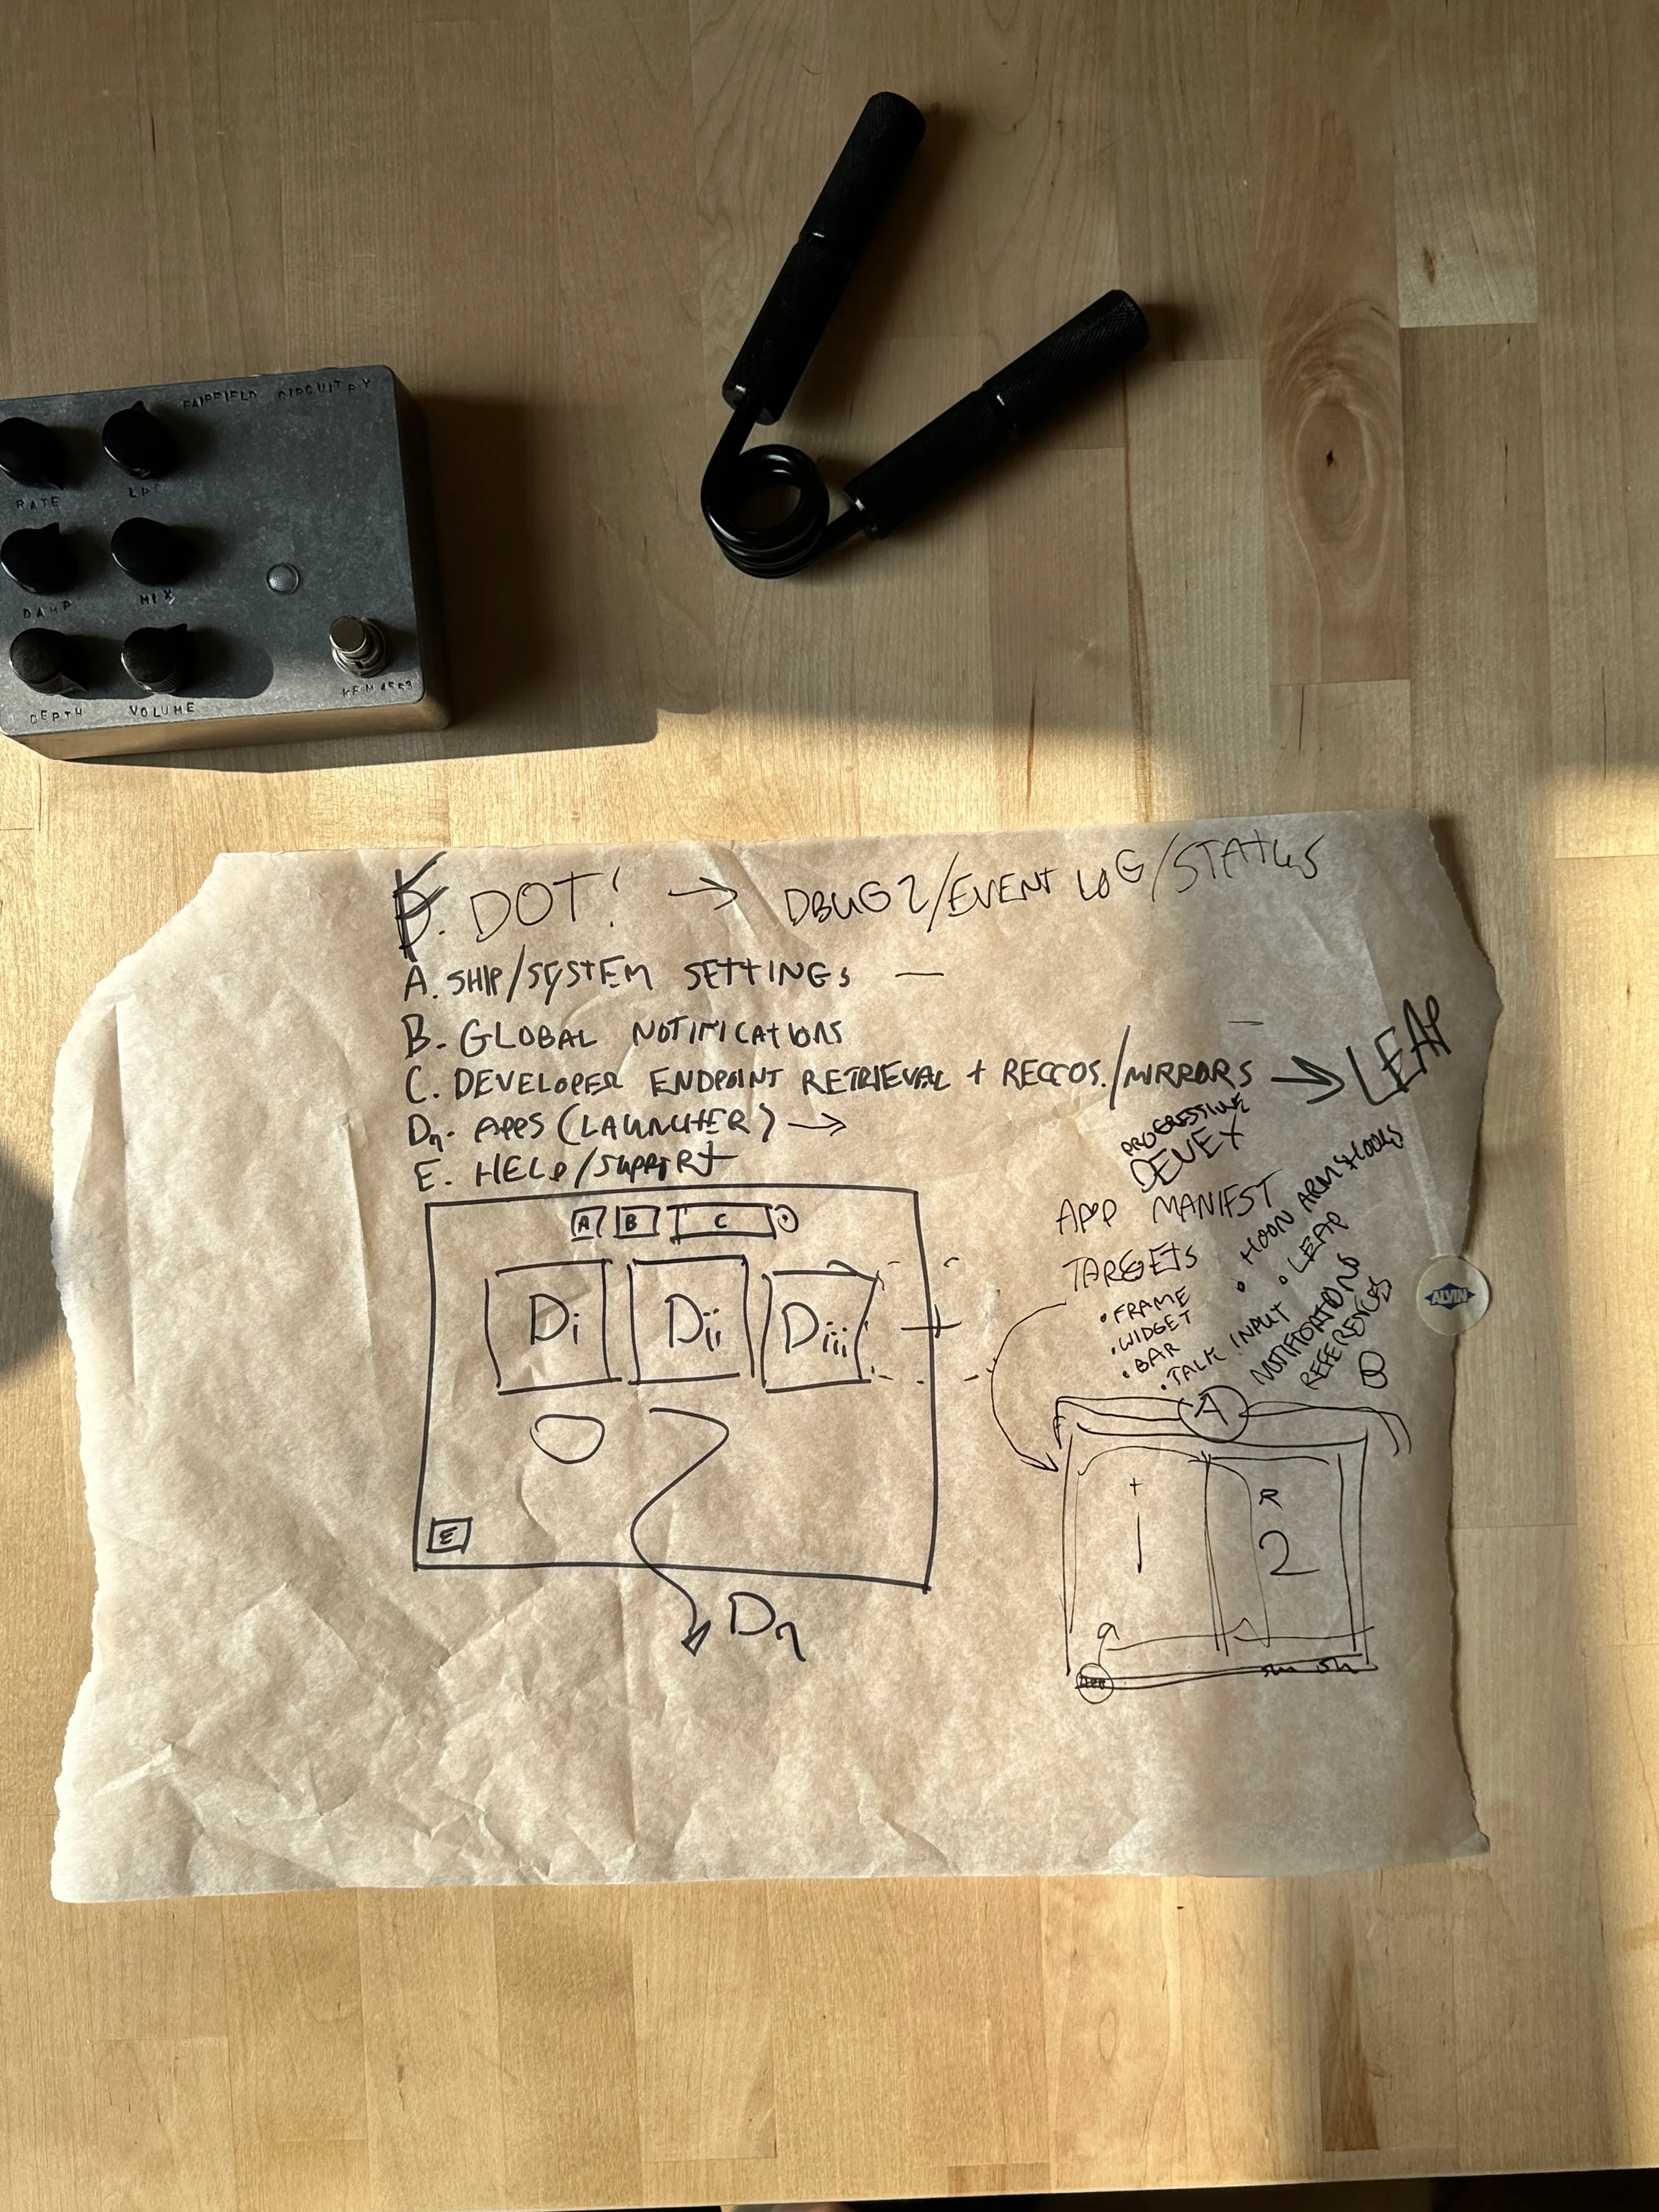 A roll of butcher paper with a sketch outlining the casting/relocation of core functionality from Grid into Surface